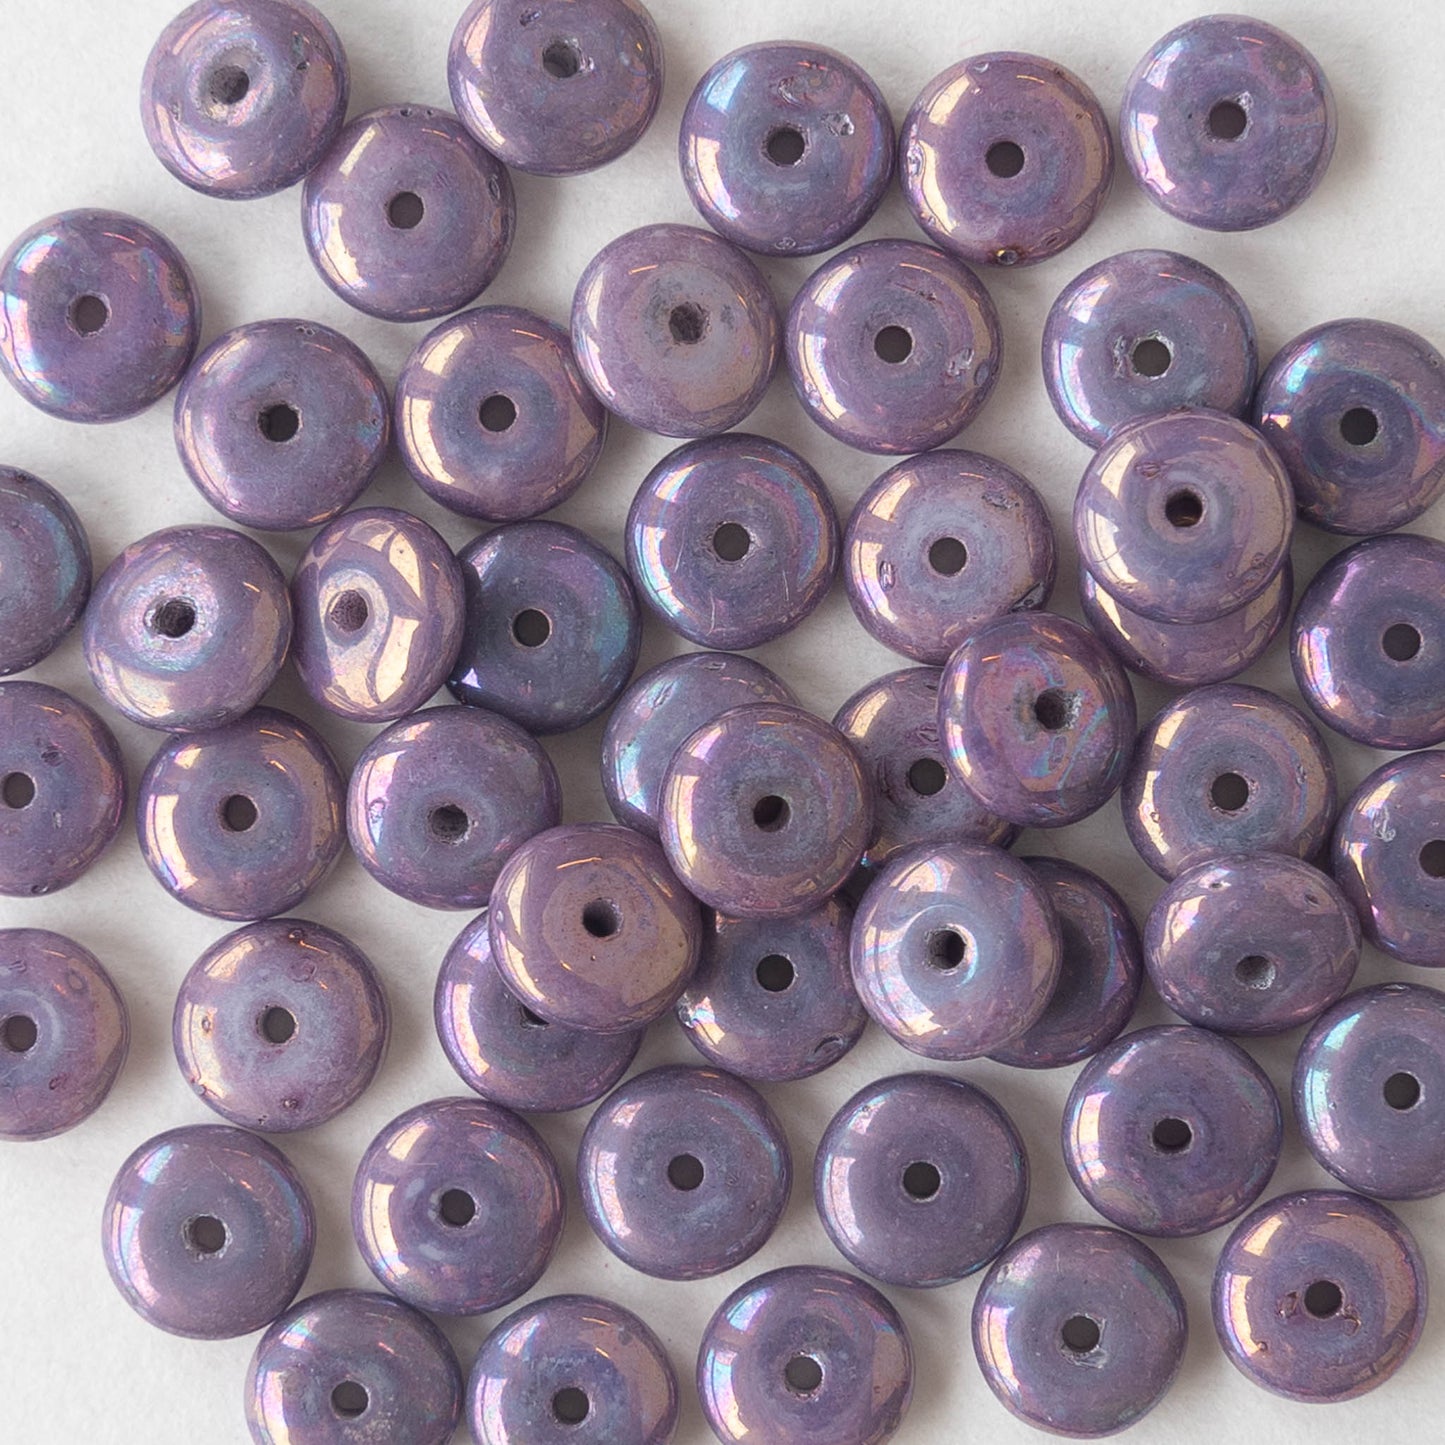 6mm Rondelle Beads - Opaque Muted Purple - 50 Beads